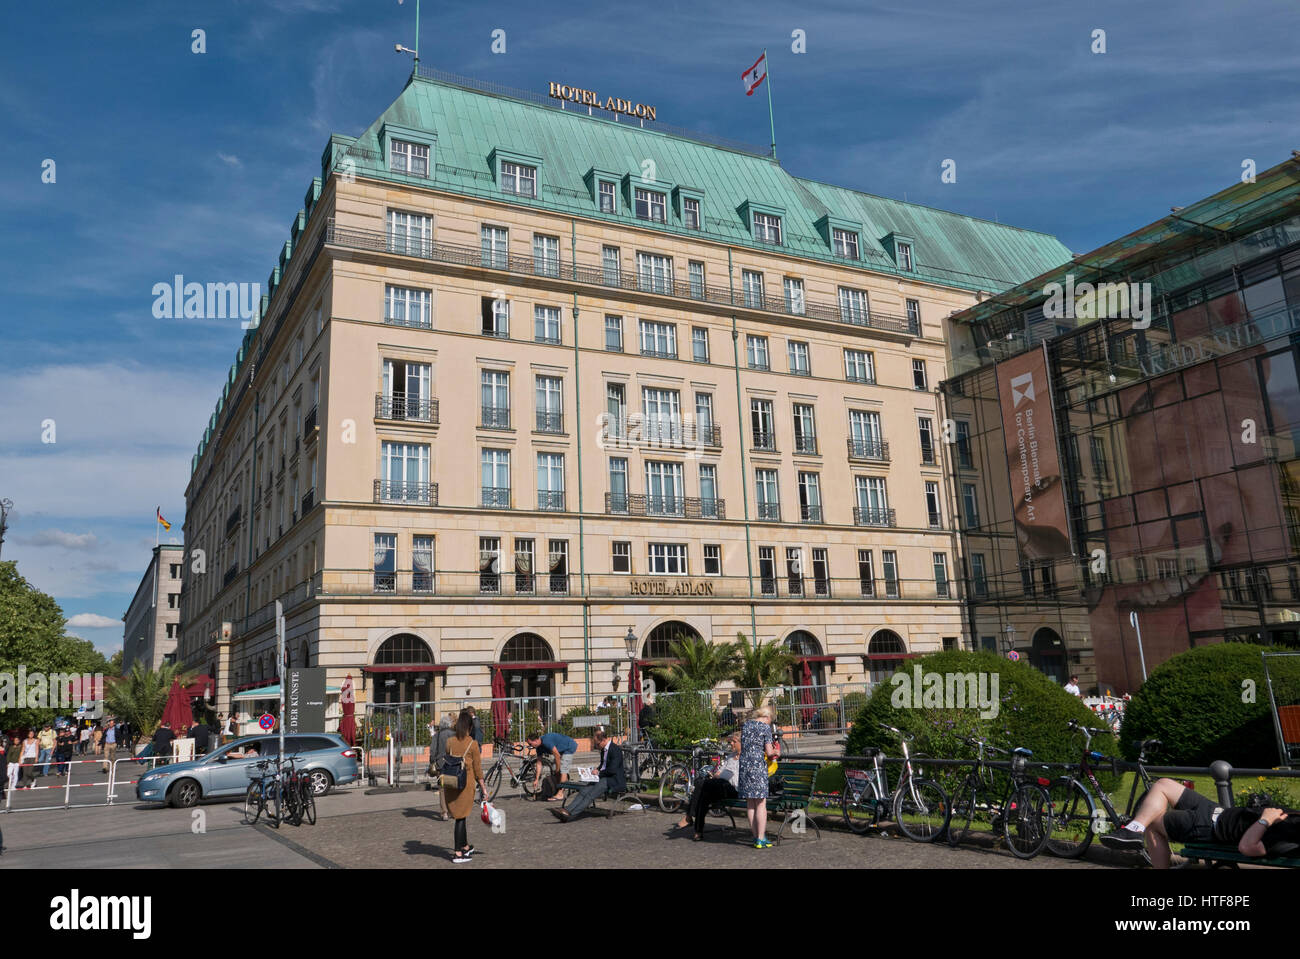 Adlon Hotel High Resolution Stock Photography and Images - Alamy